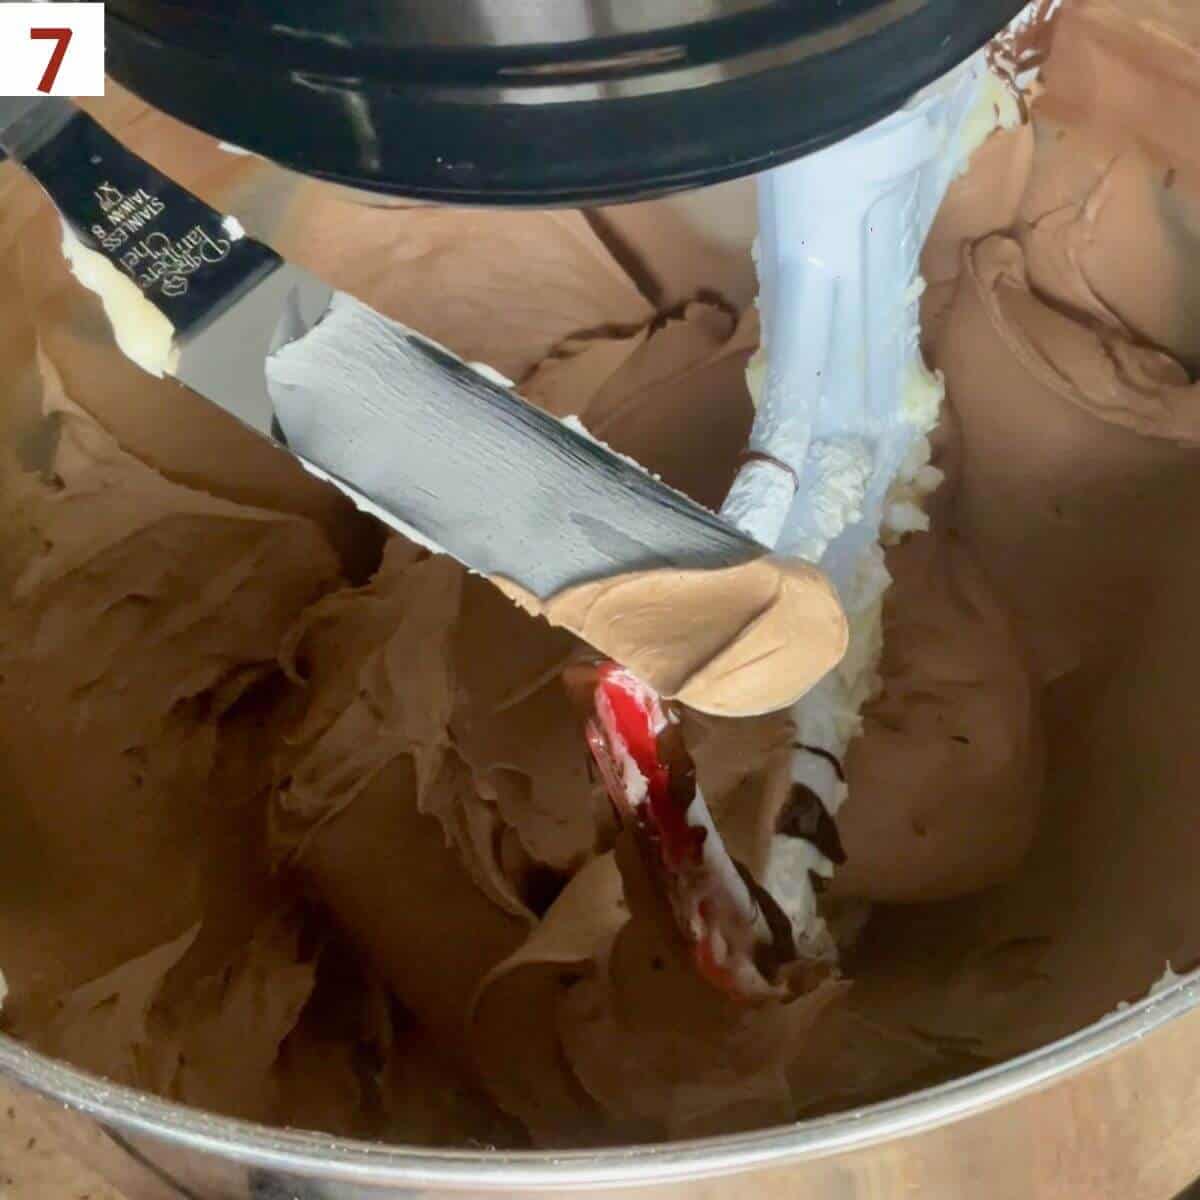 Dark chocolate buttercream shown on an small offset spatula over a stand mixer bowl of frosting.